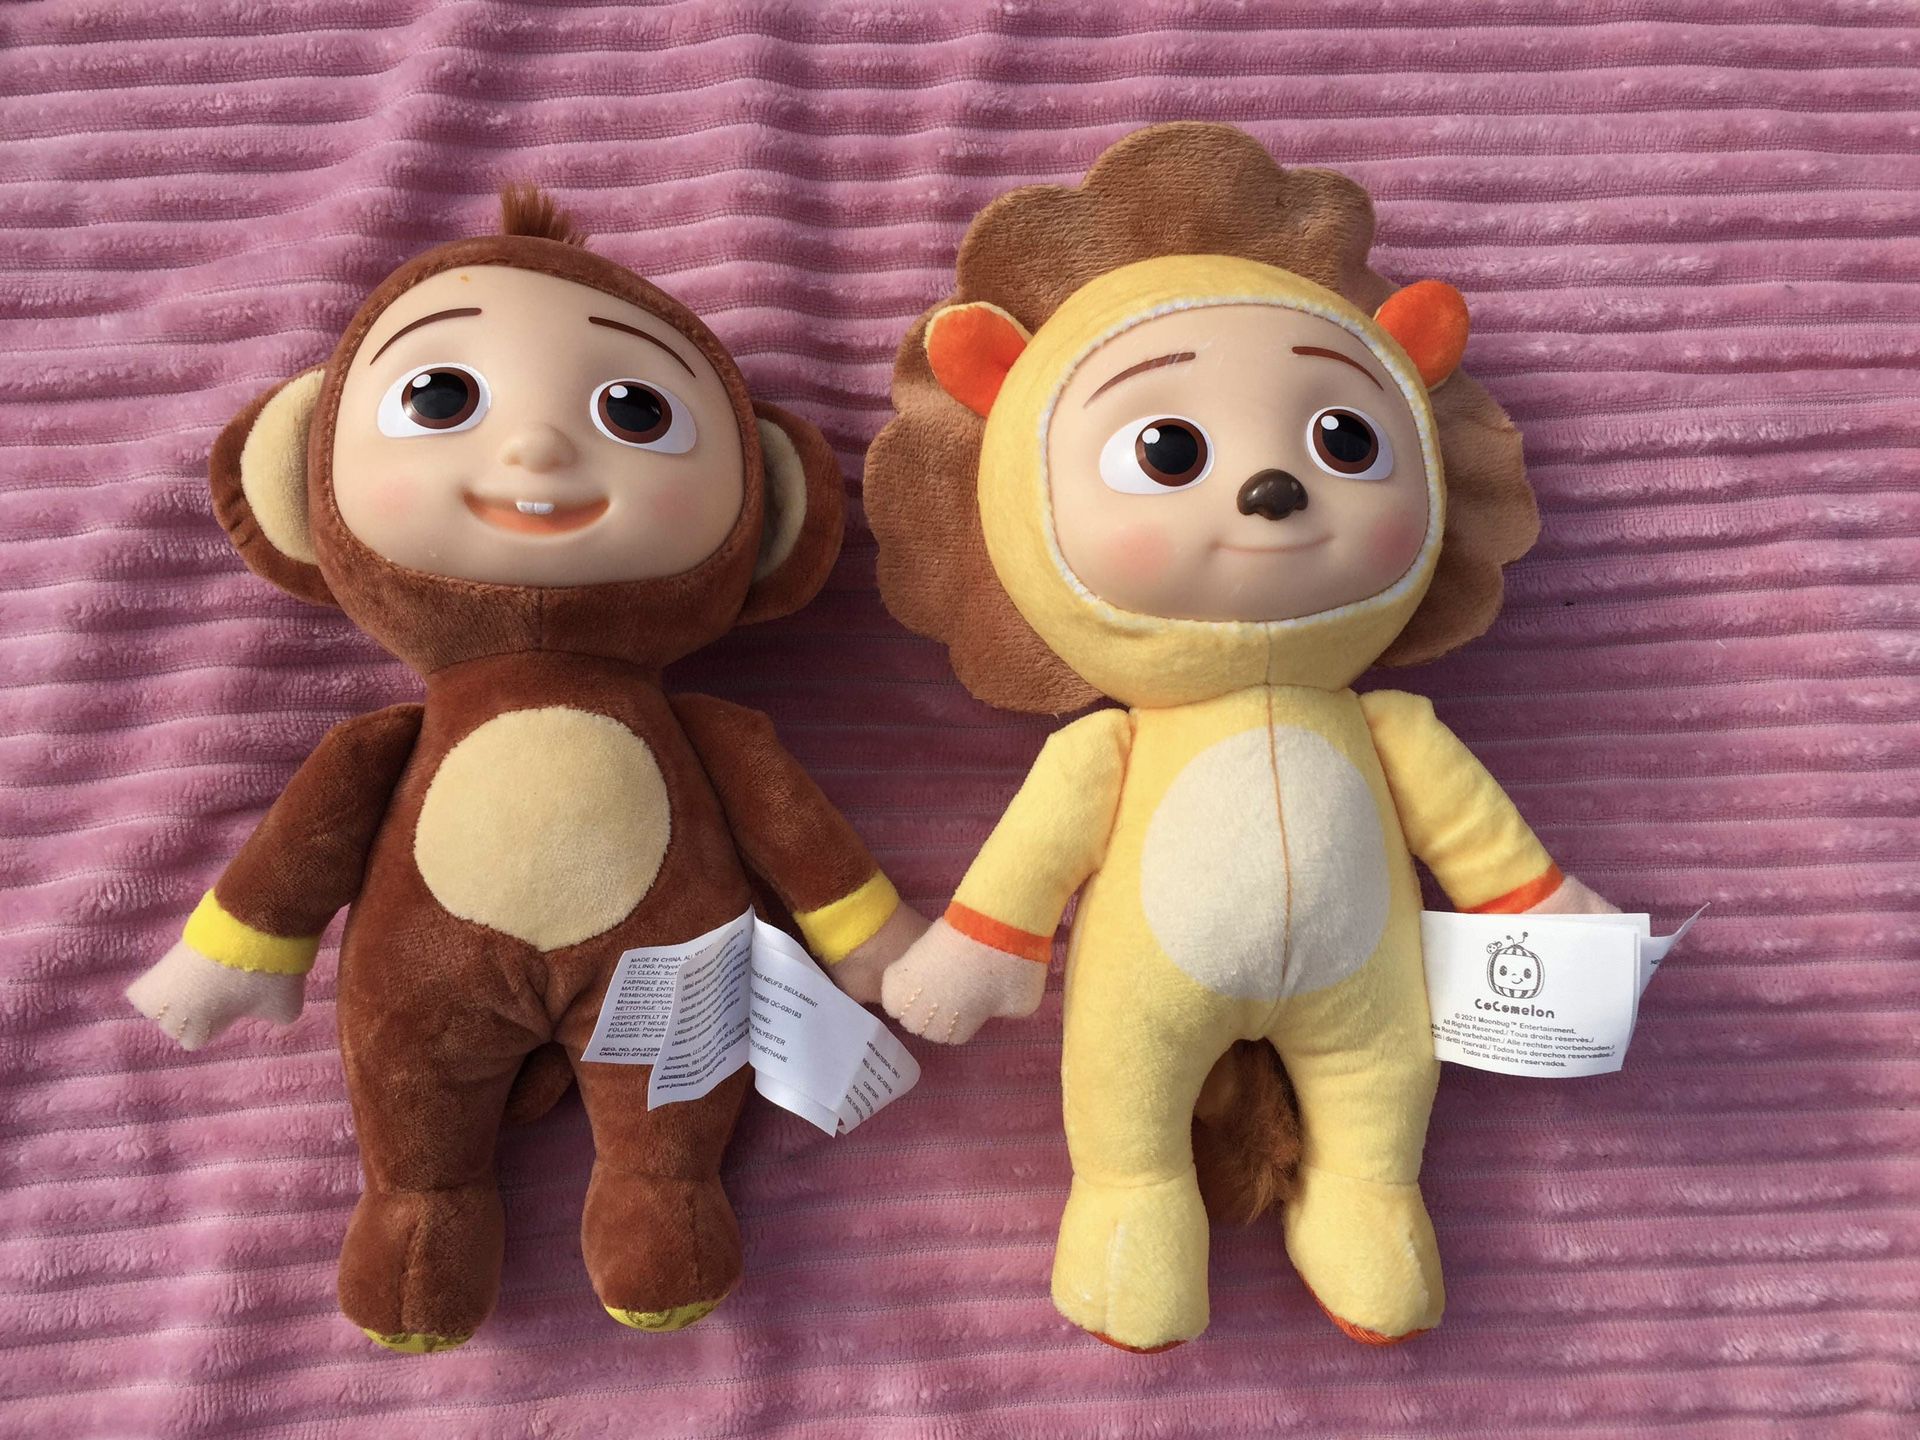 CoComelon MONKEY and LION Plush Stuffed Animal Toy 8” lot of 2